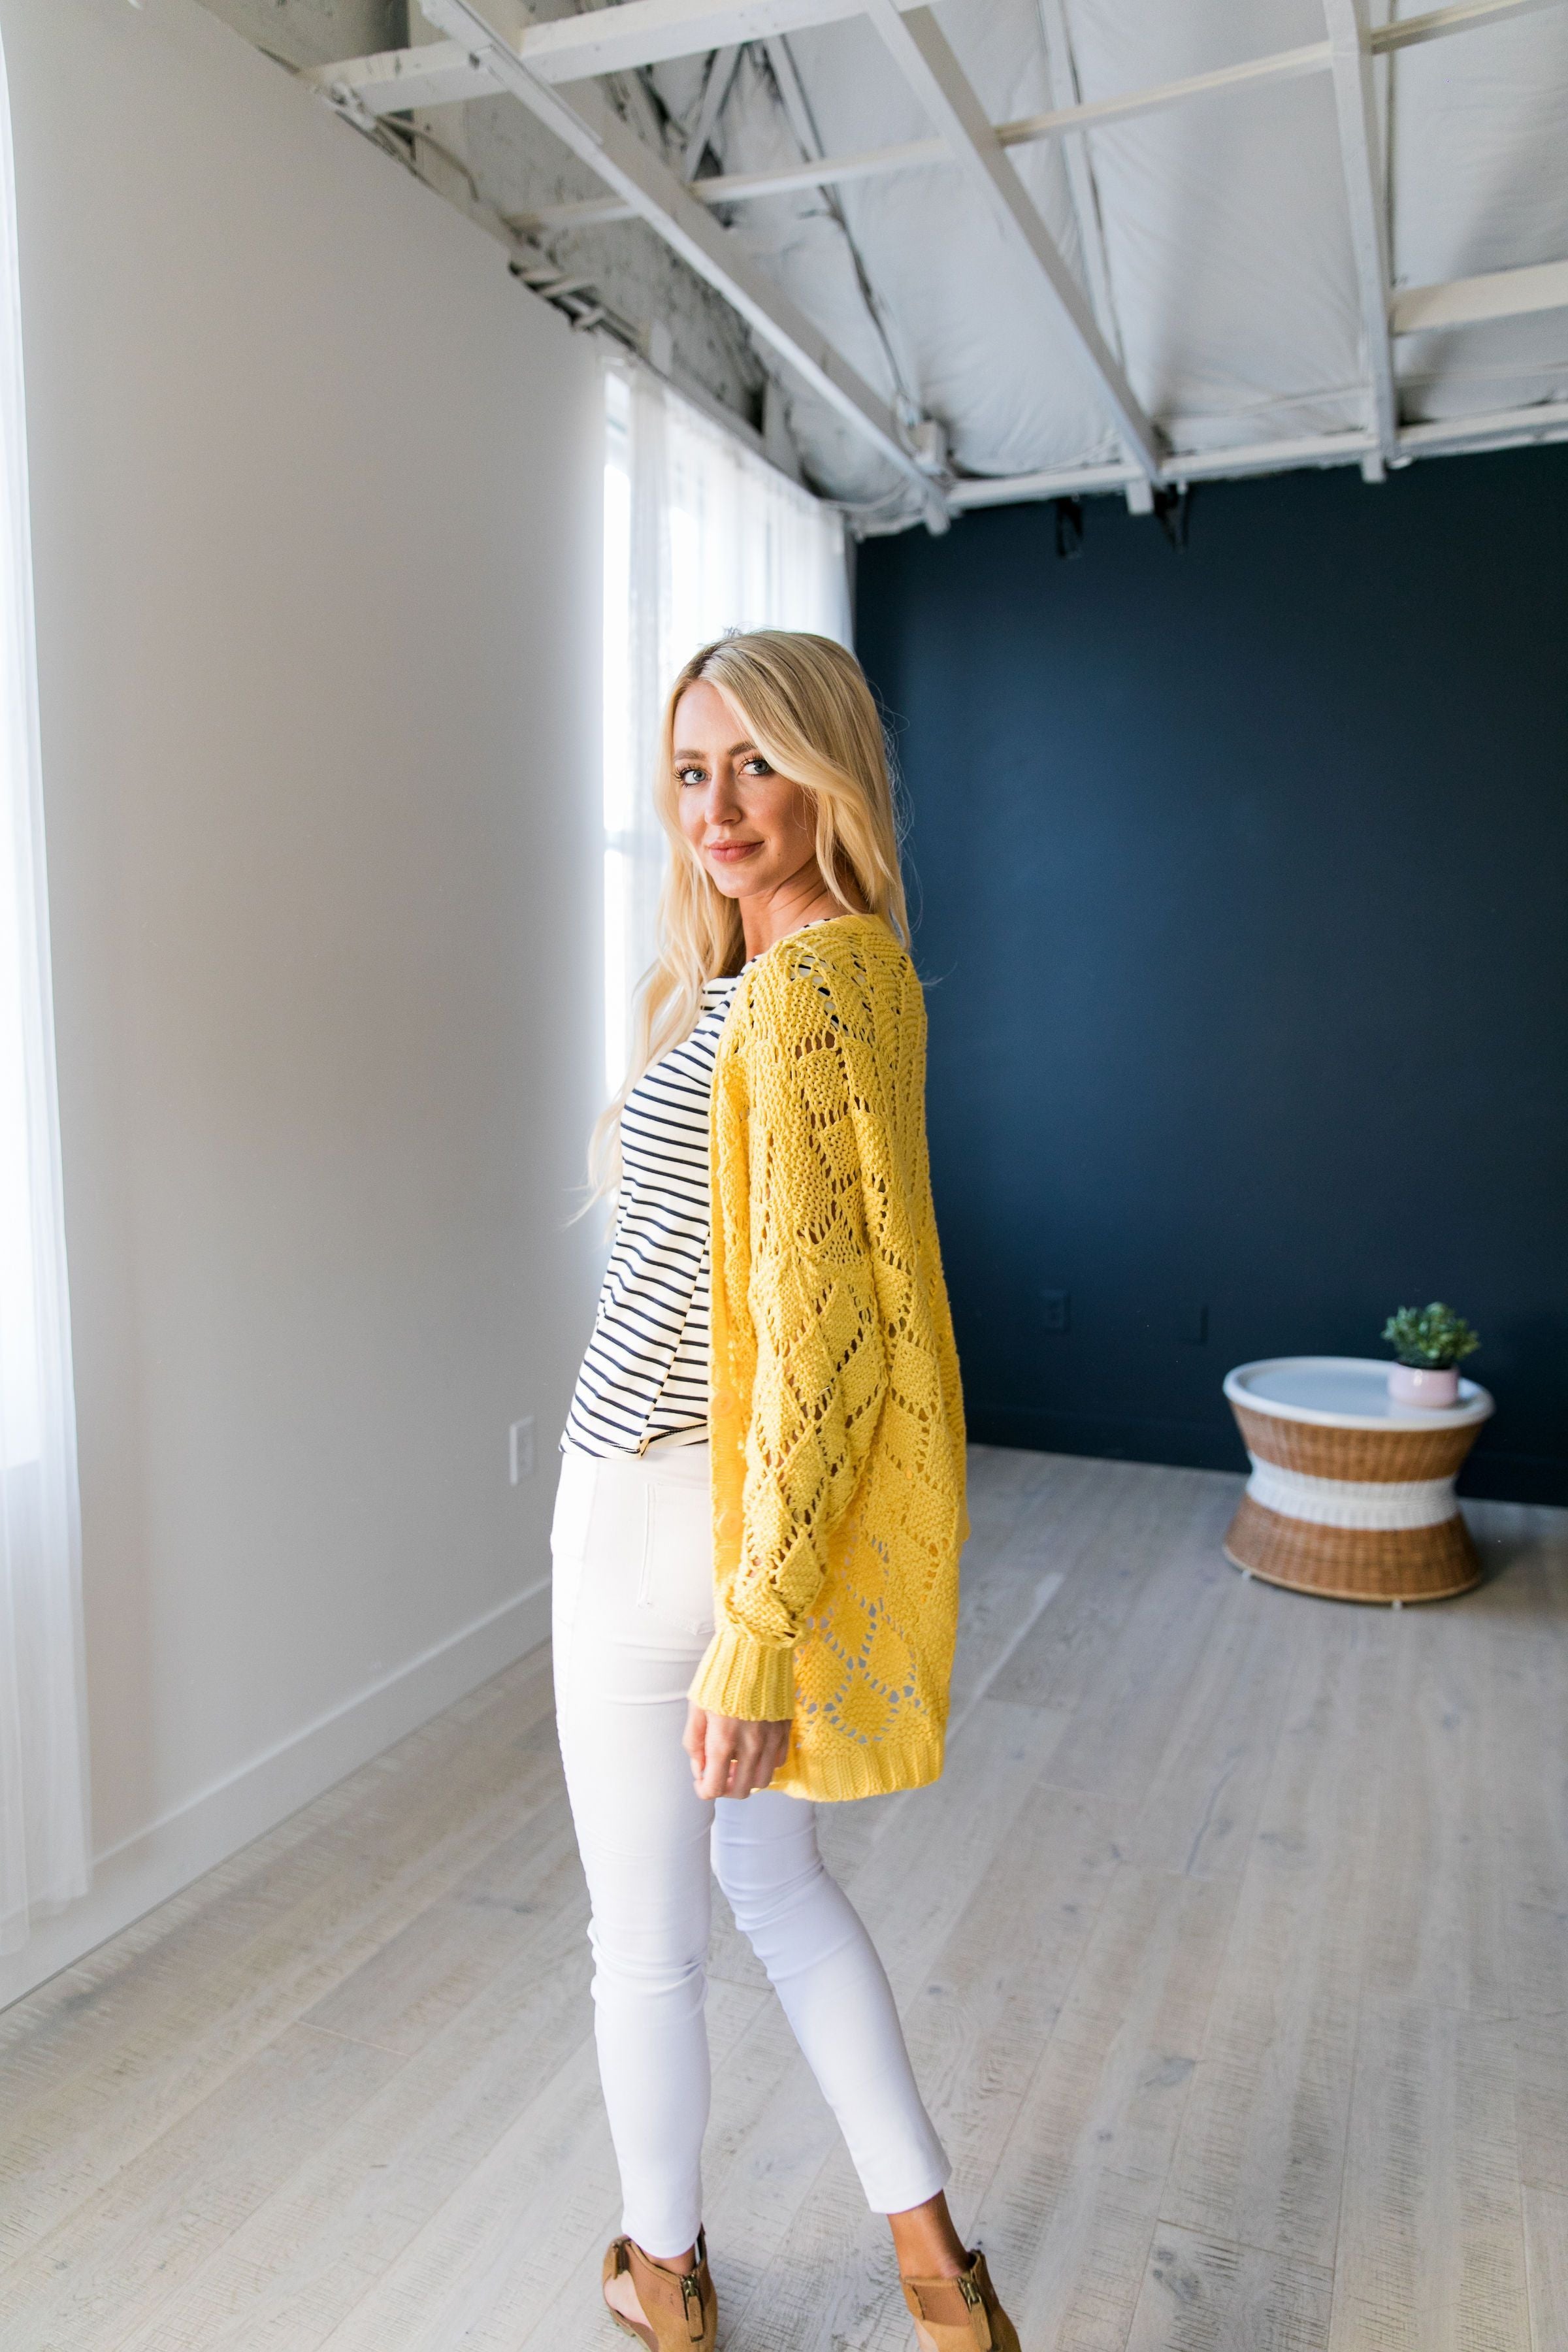 Delilah Diamond Knit Cardi In Yellow - ALL SALES FINAL